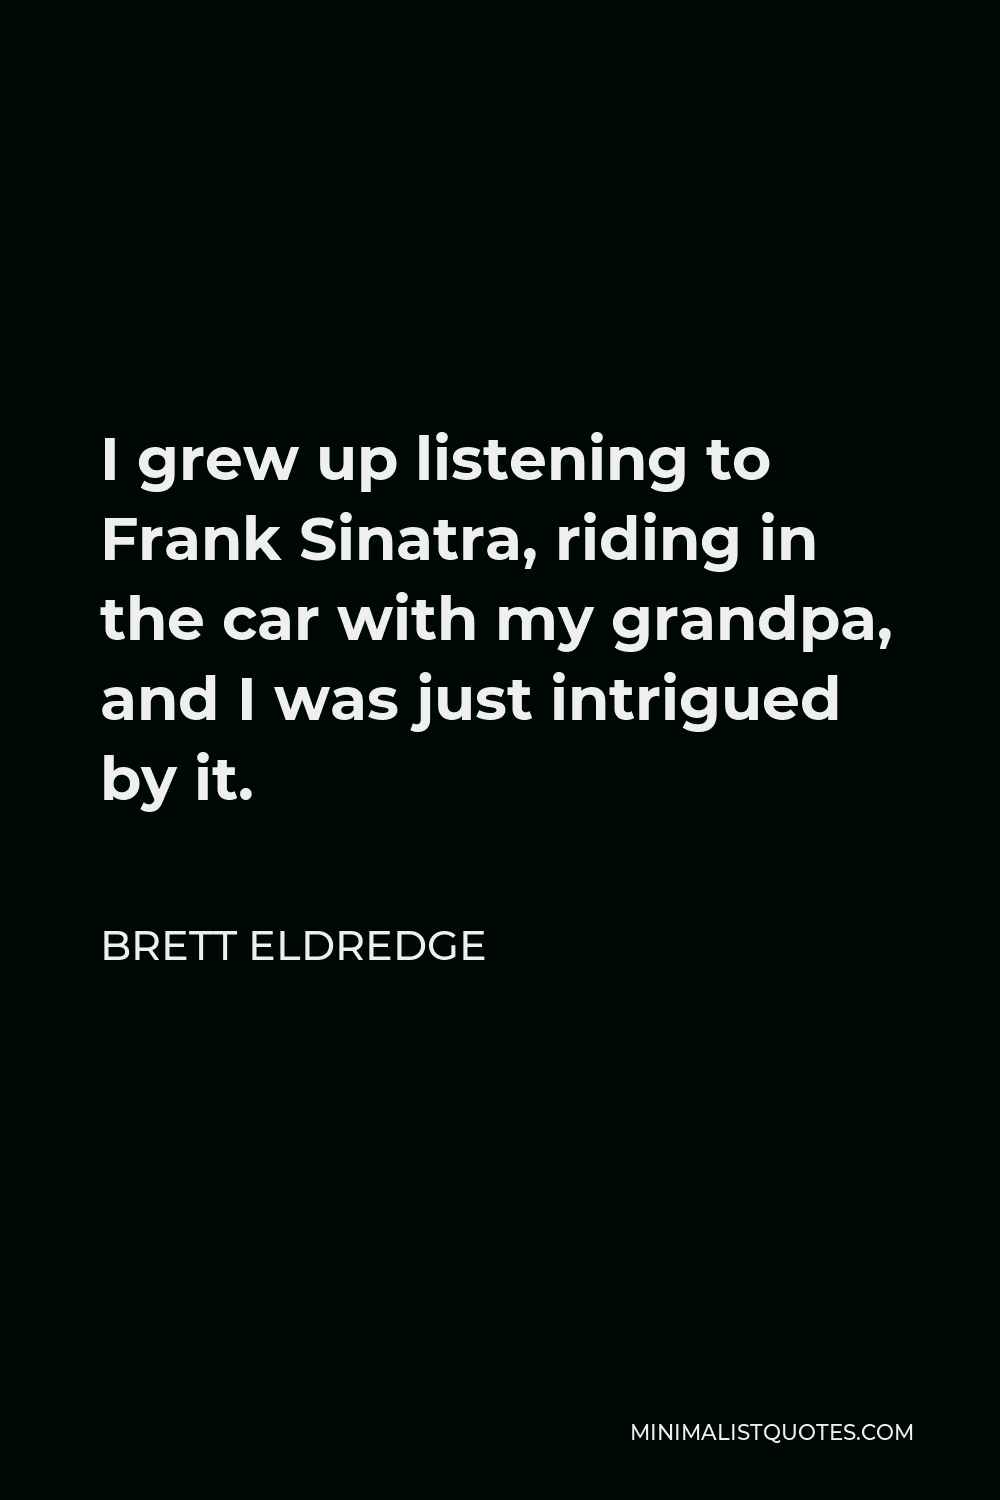 Brett Eldredge Quote - I grew up listening to Frank Sinatra, riding in the car with my grandpa, and I was just intrigued by it.